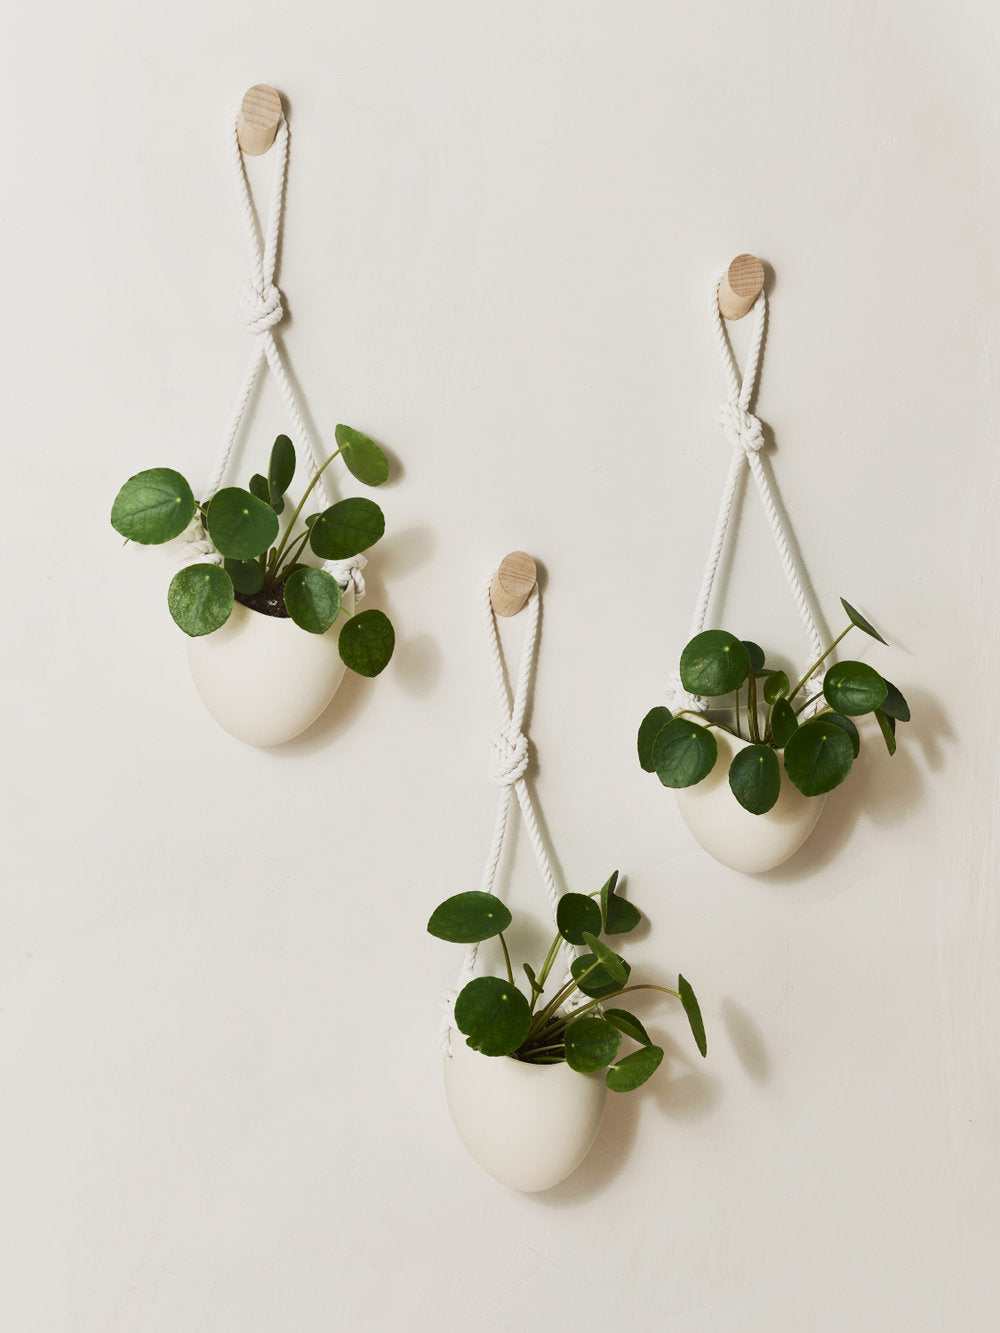 Set of 3 wall hanging planters with rope and money plants